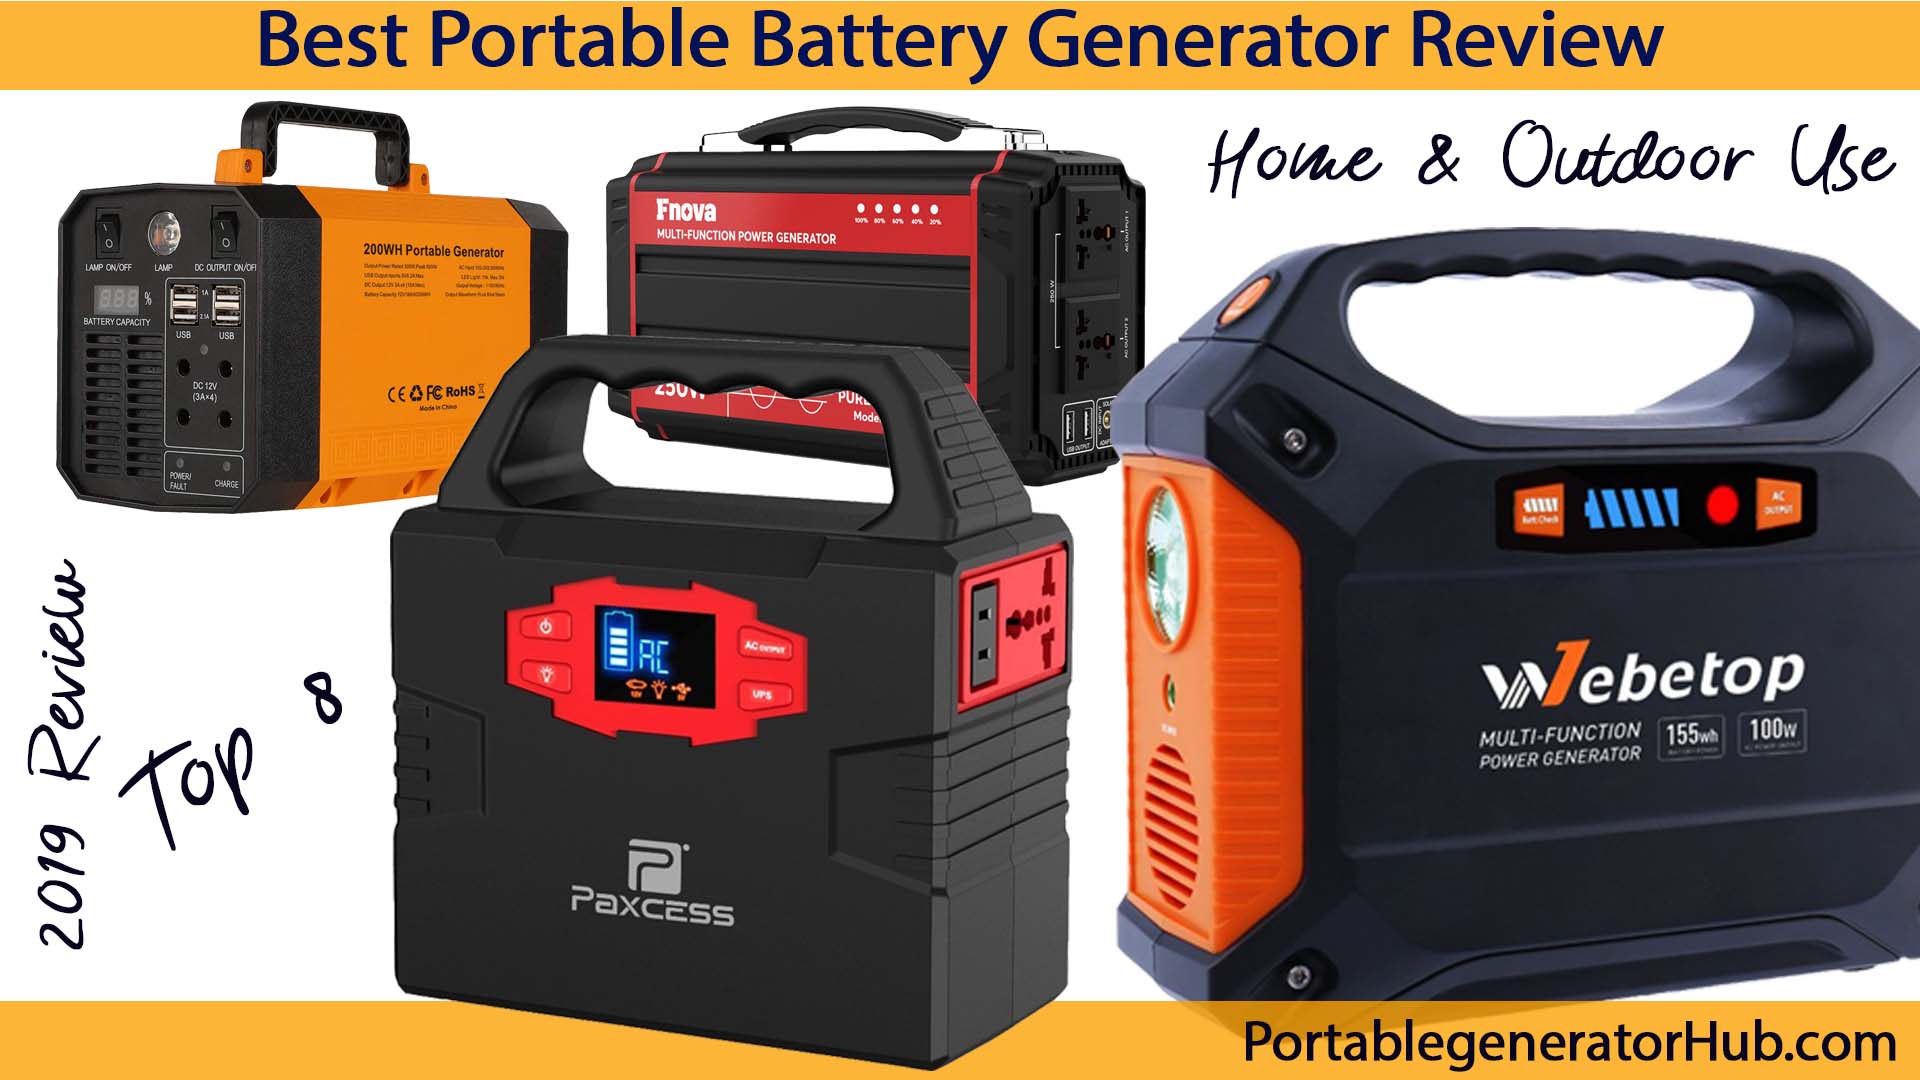 12 Best Portable Battery Generator 2019 Review - Perfect For Camping